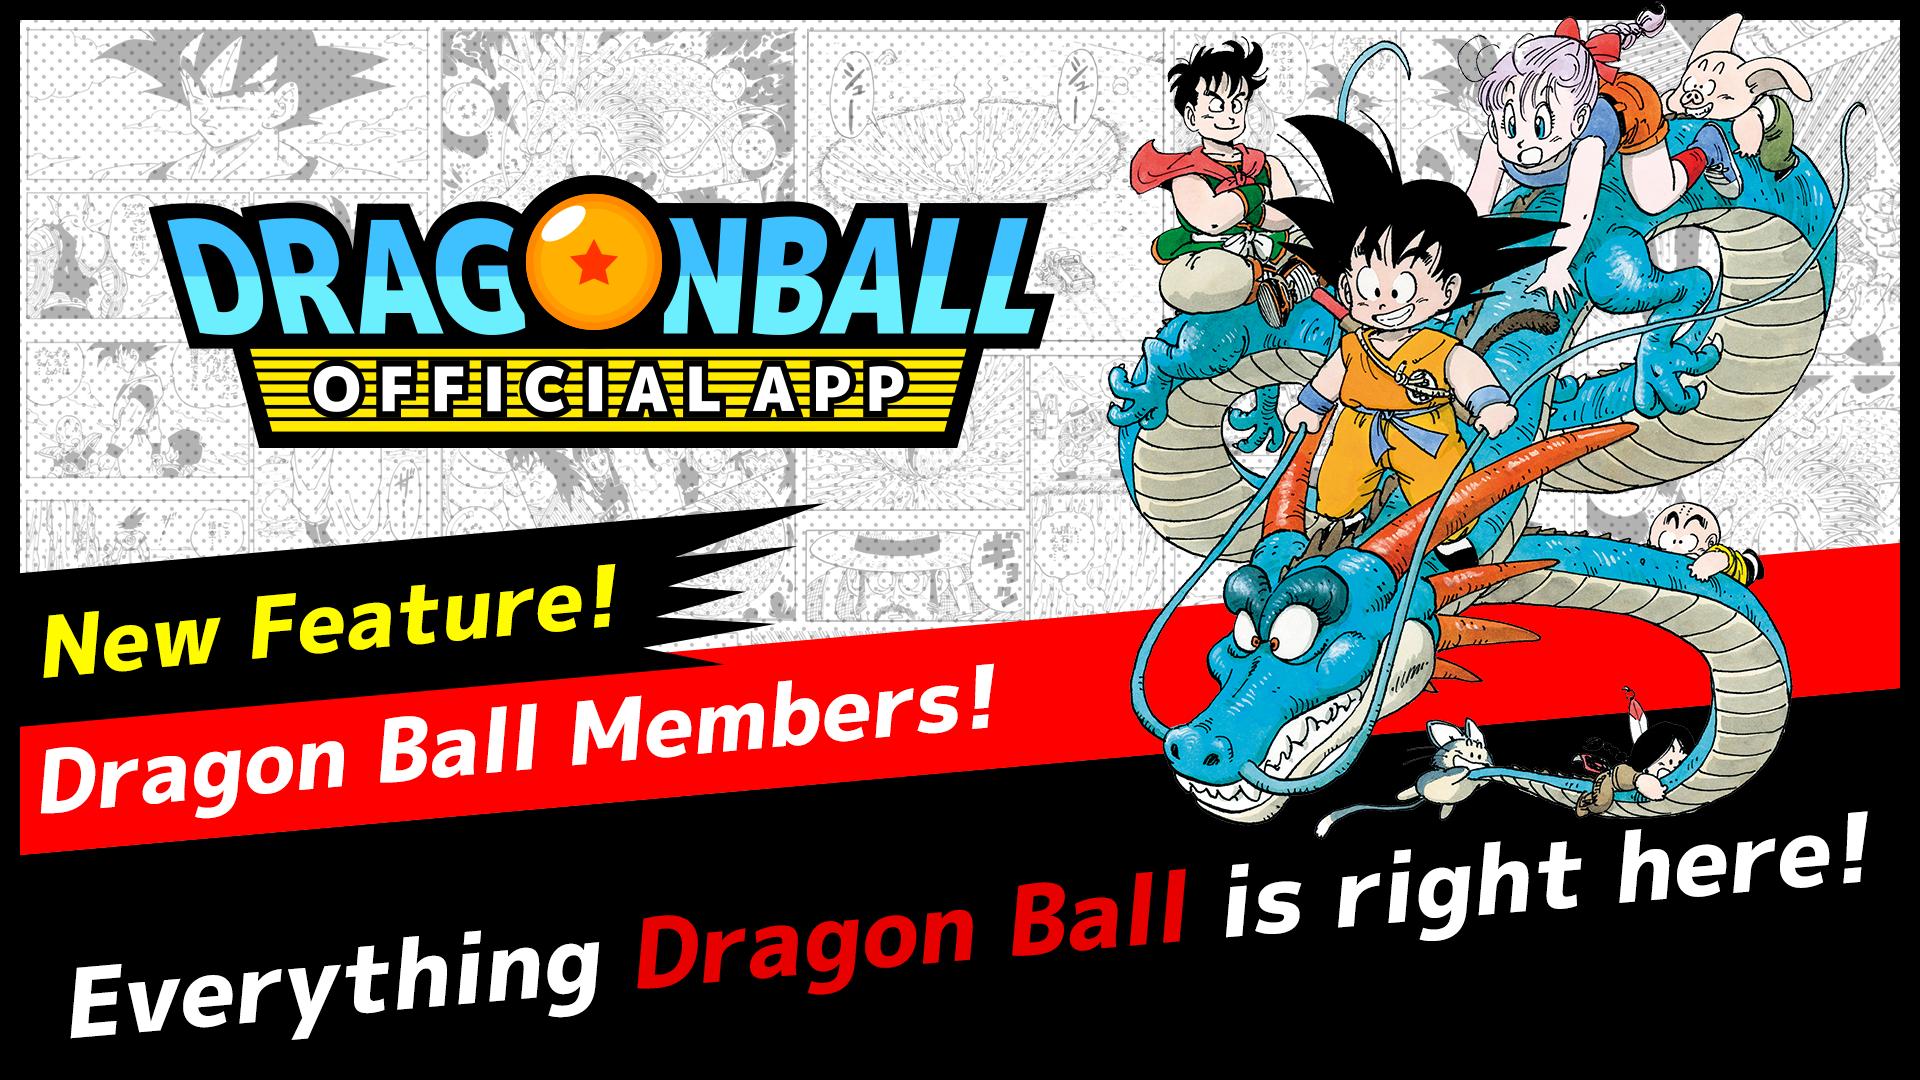 DRAGON BALL OFFICIAL SITE